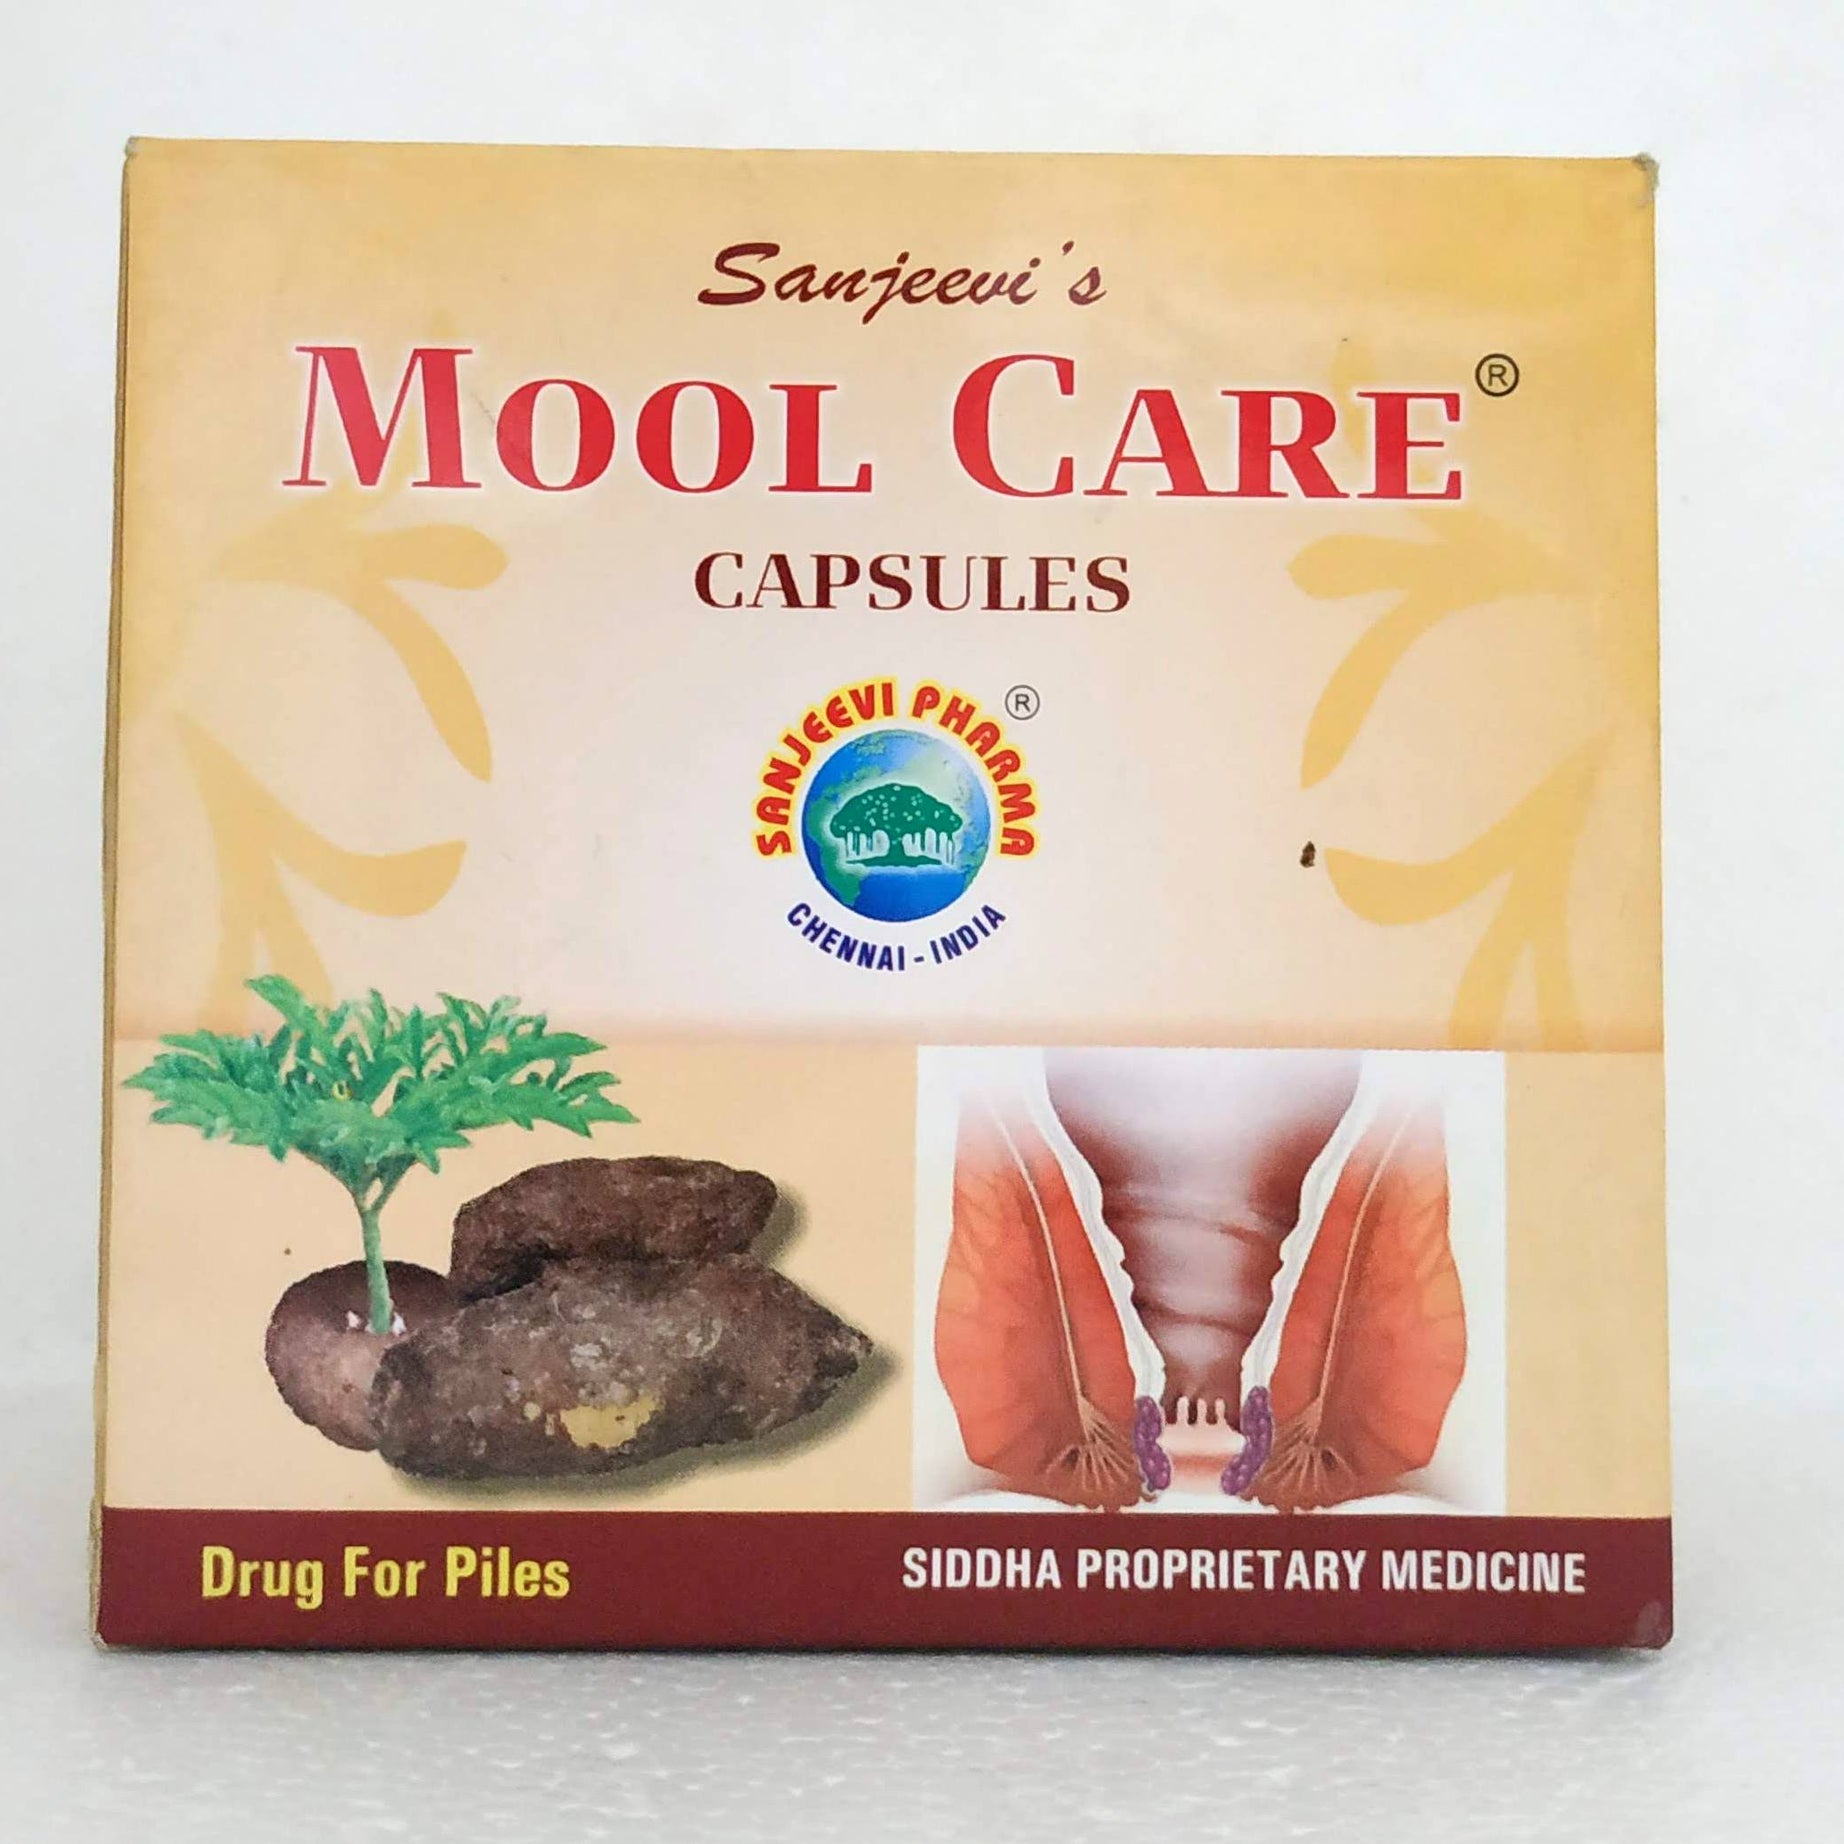 Shop Moolcare Capsules - 10Capsules at price 50.00 from Sanjeevi Online - Ayush Care